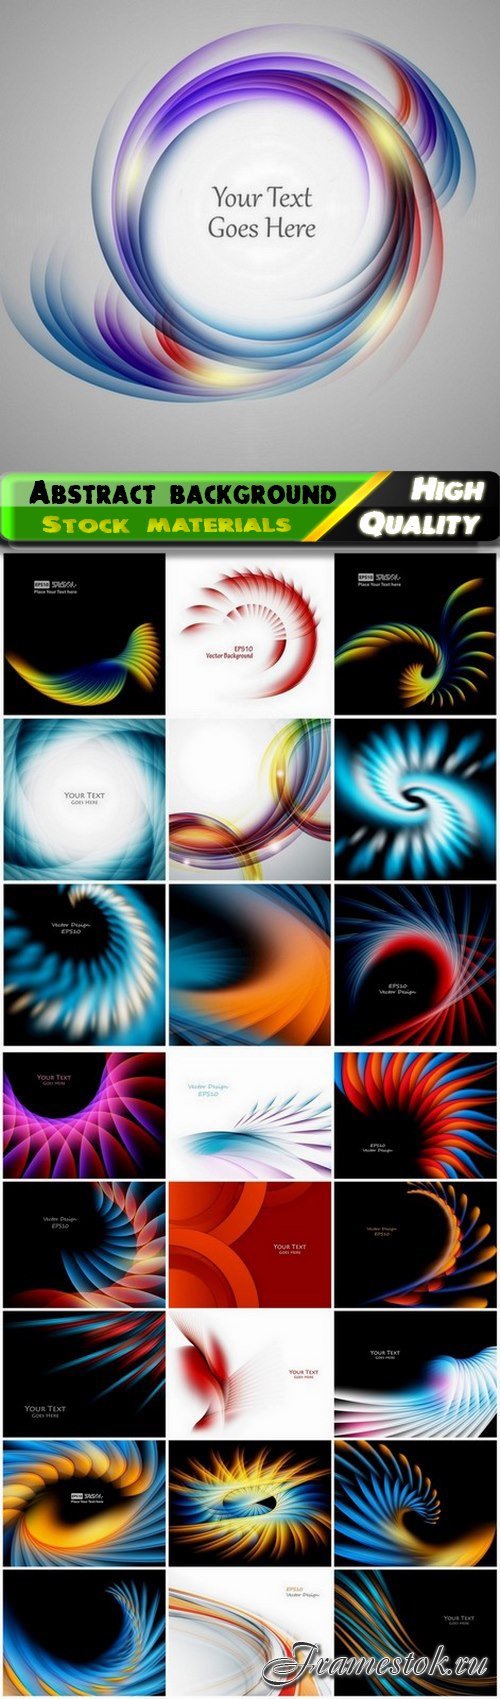 Abstract background with light effect and blurred element - 25 Eps